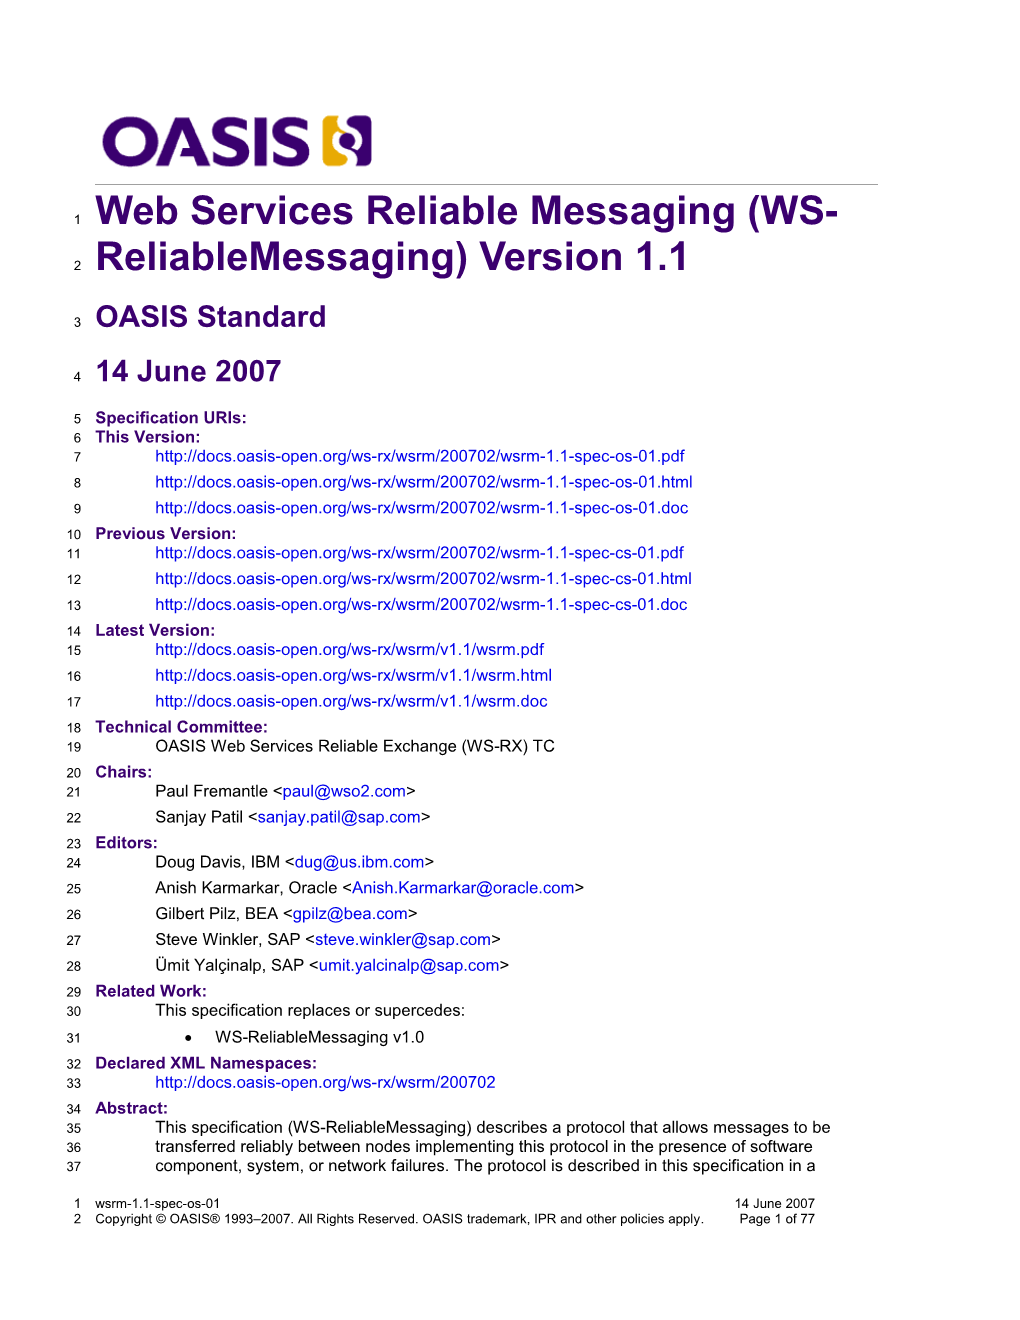 Web Services Reliable Messaging (WS-Reliablemessaging) Version 1.1